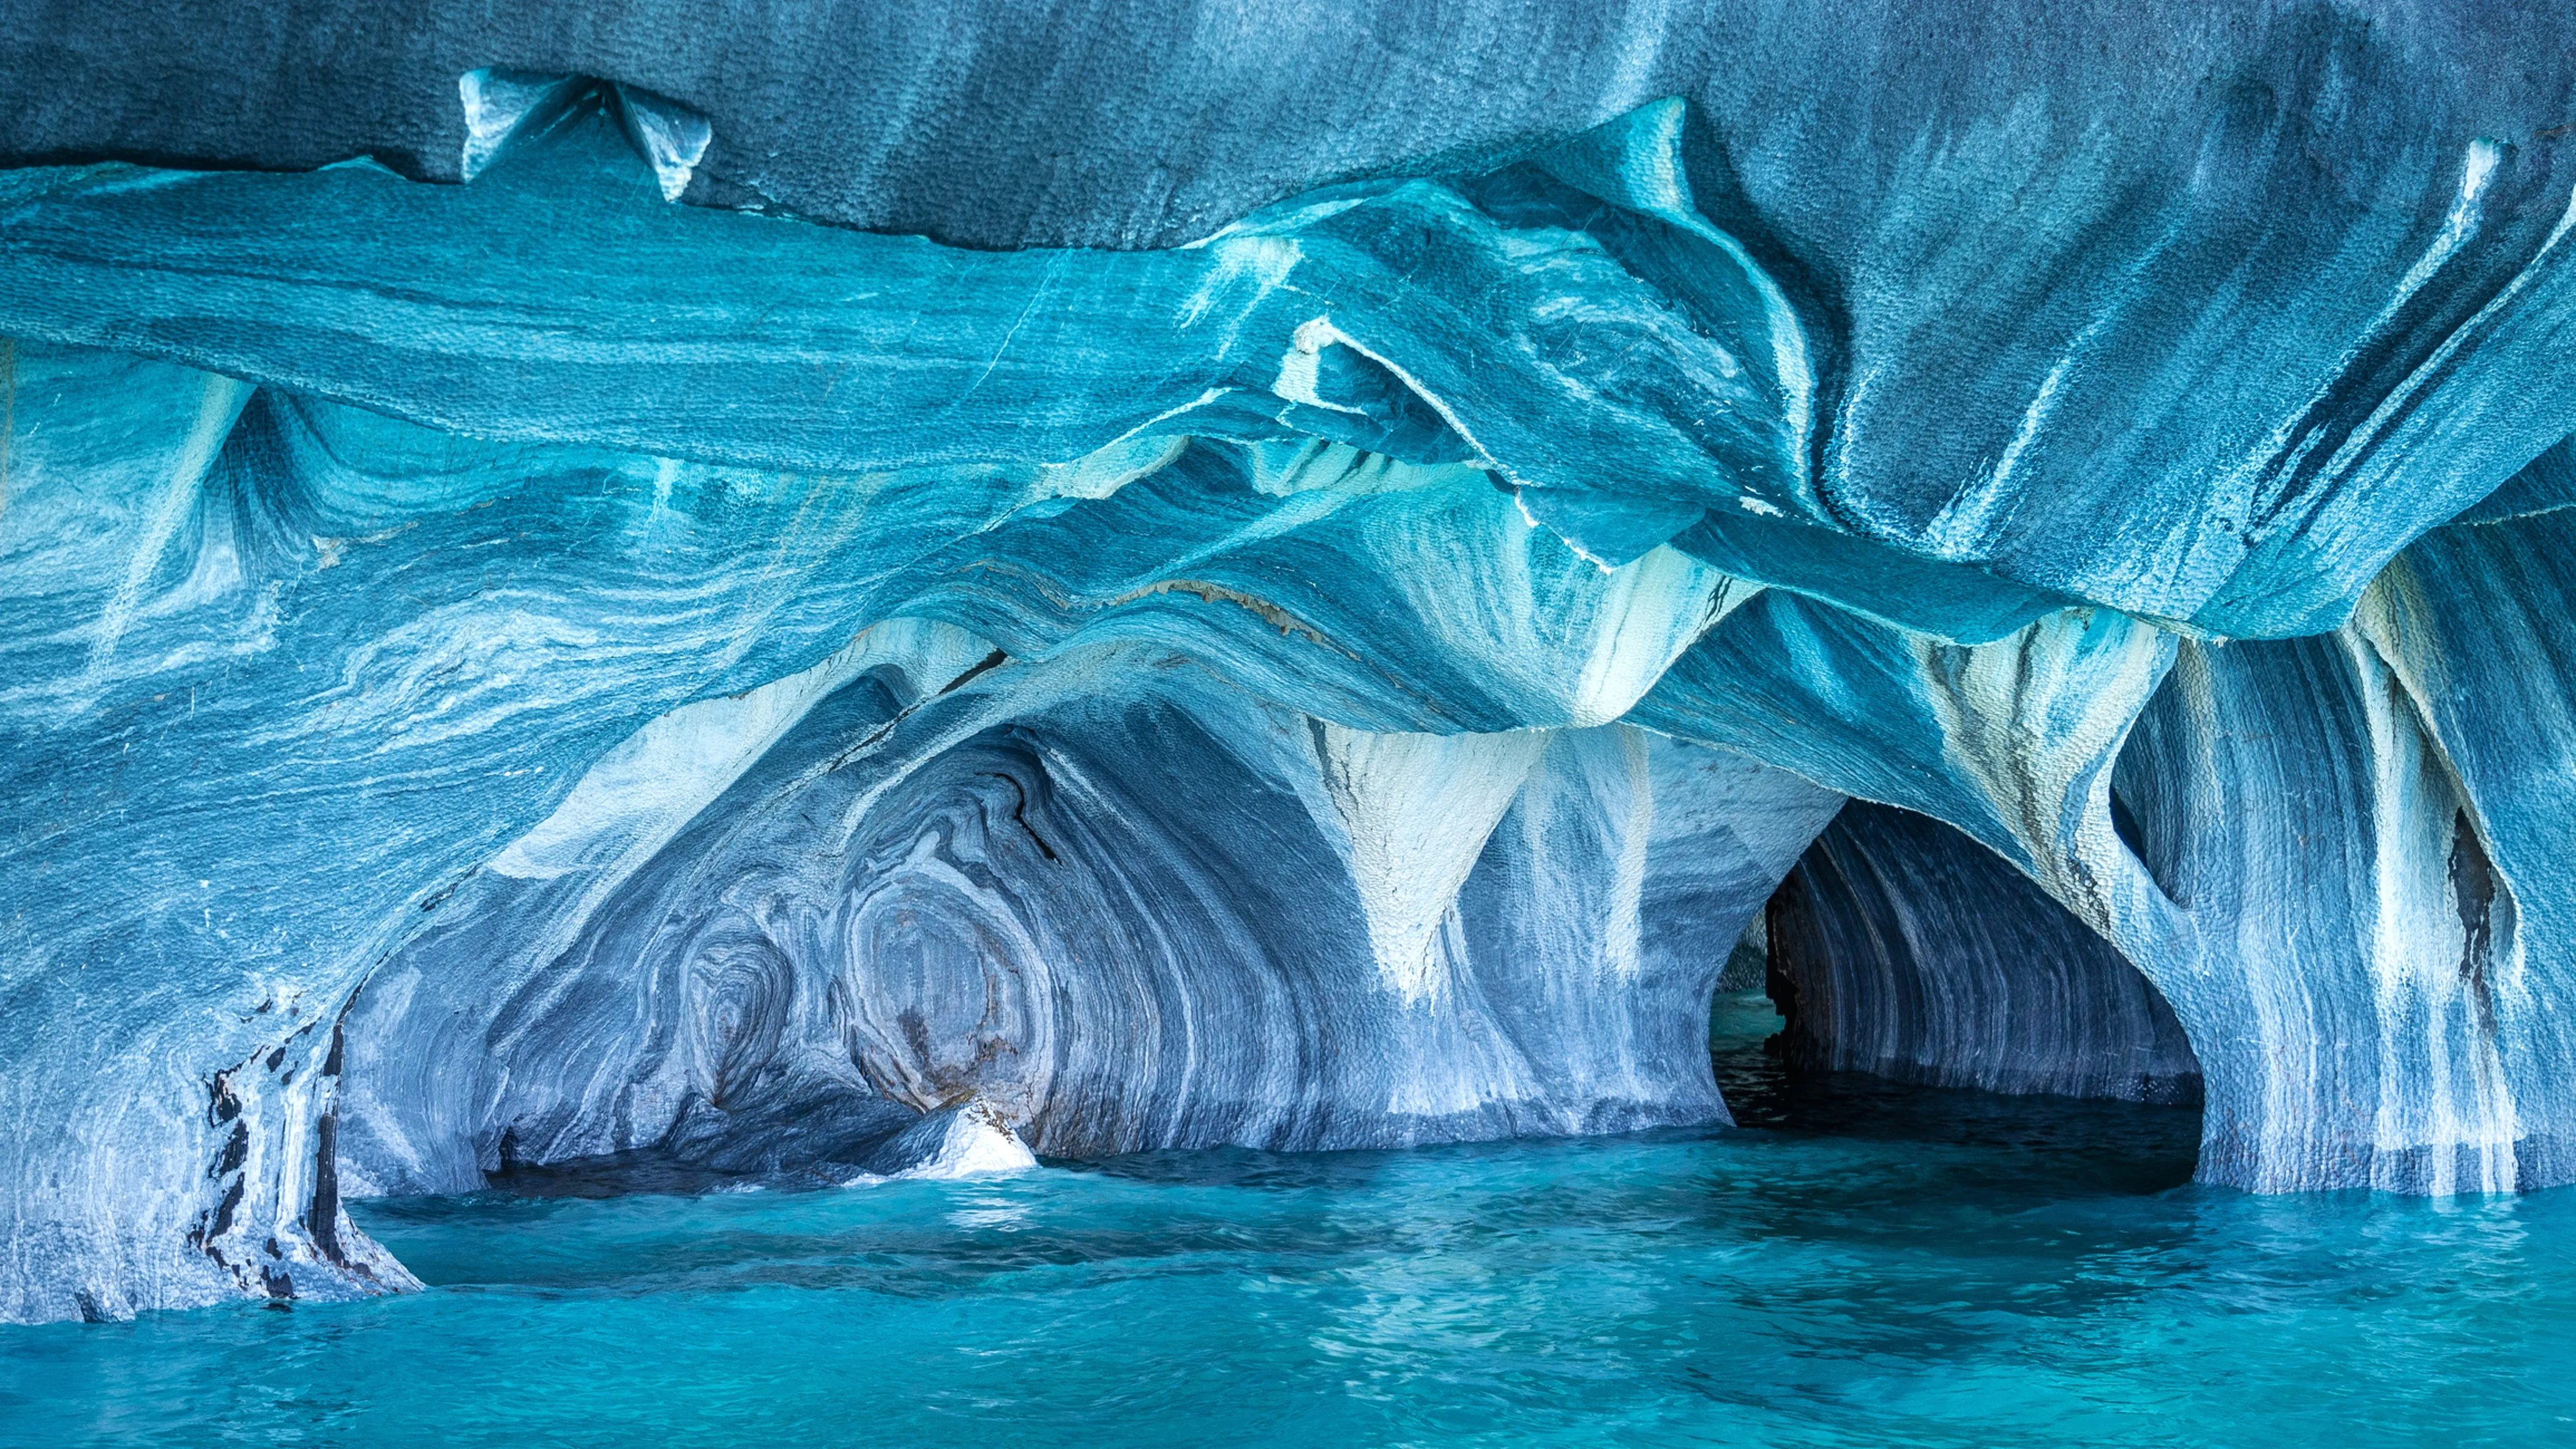 Marble Cathedral in Chile, South America | Caves & Underground Places - Rated 0.9